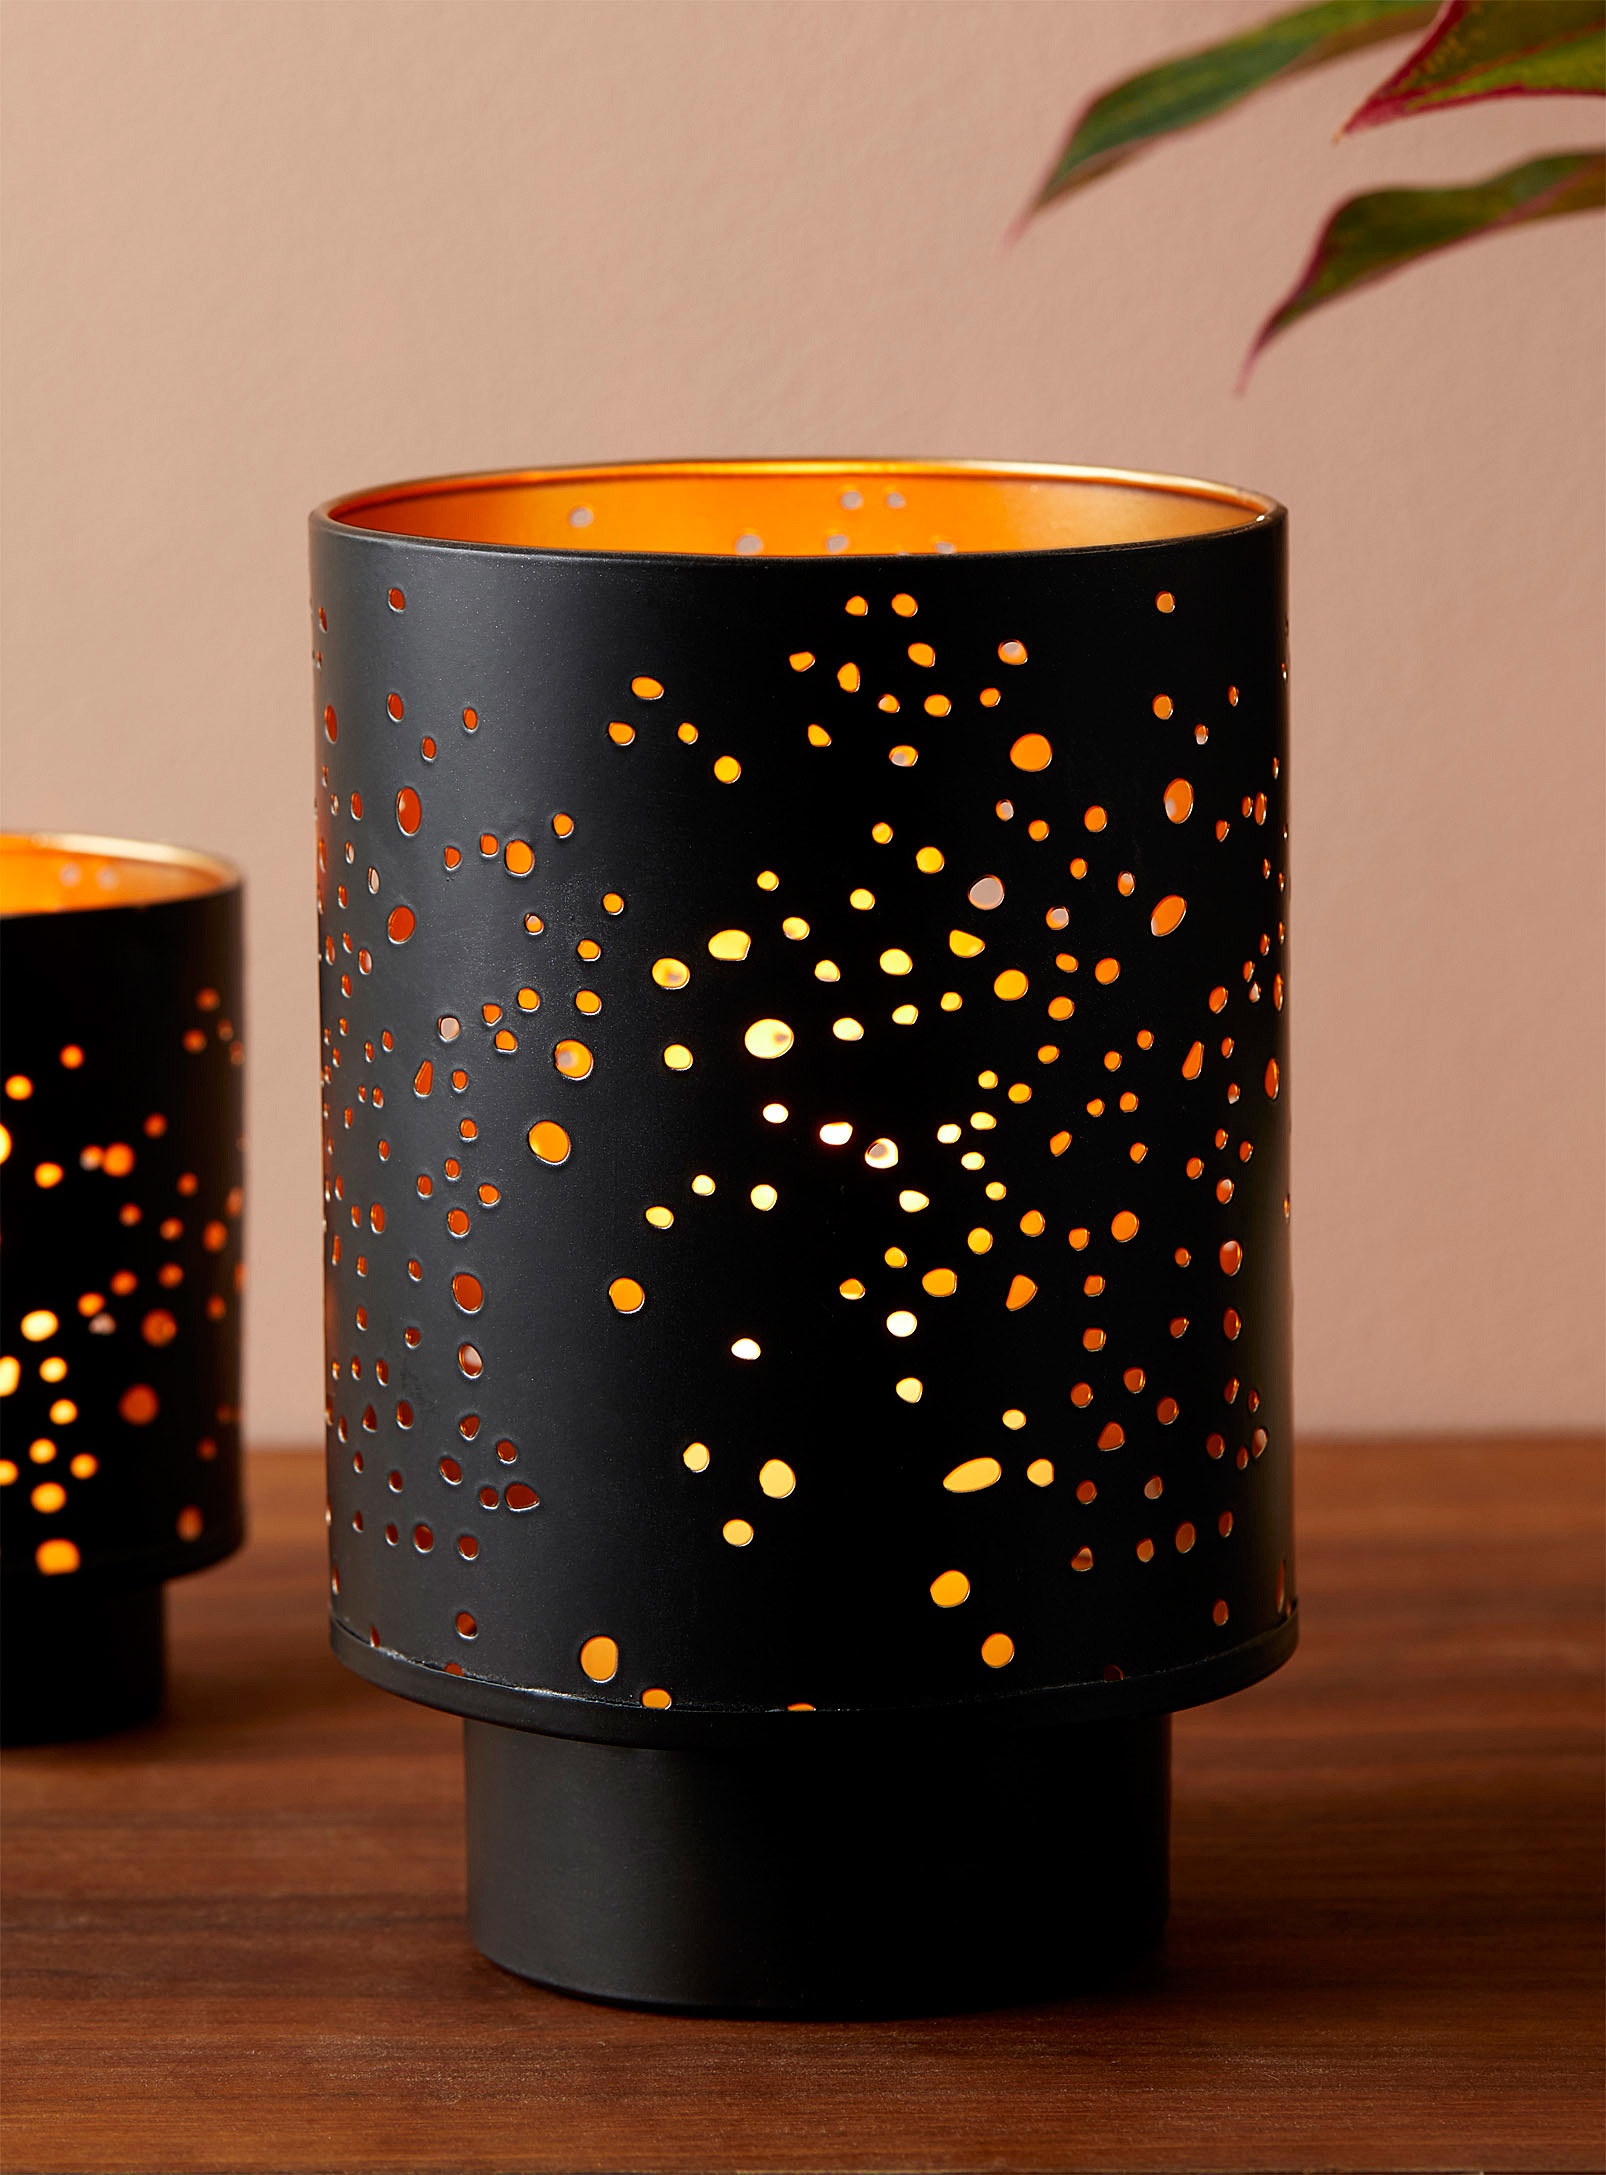 A small candle holder with holes on the sides